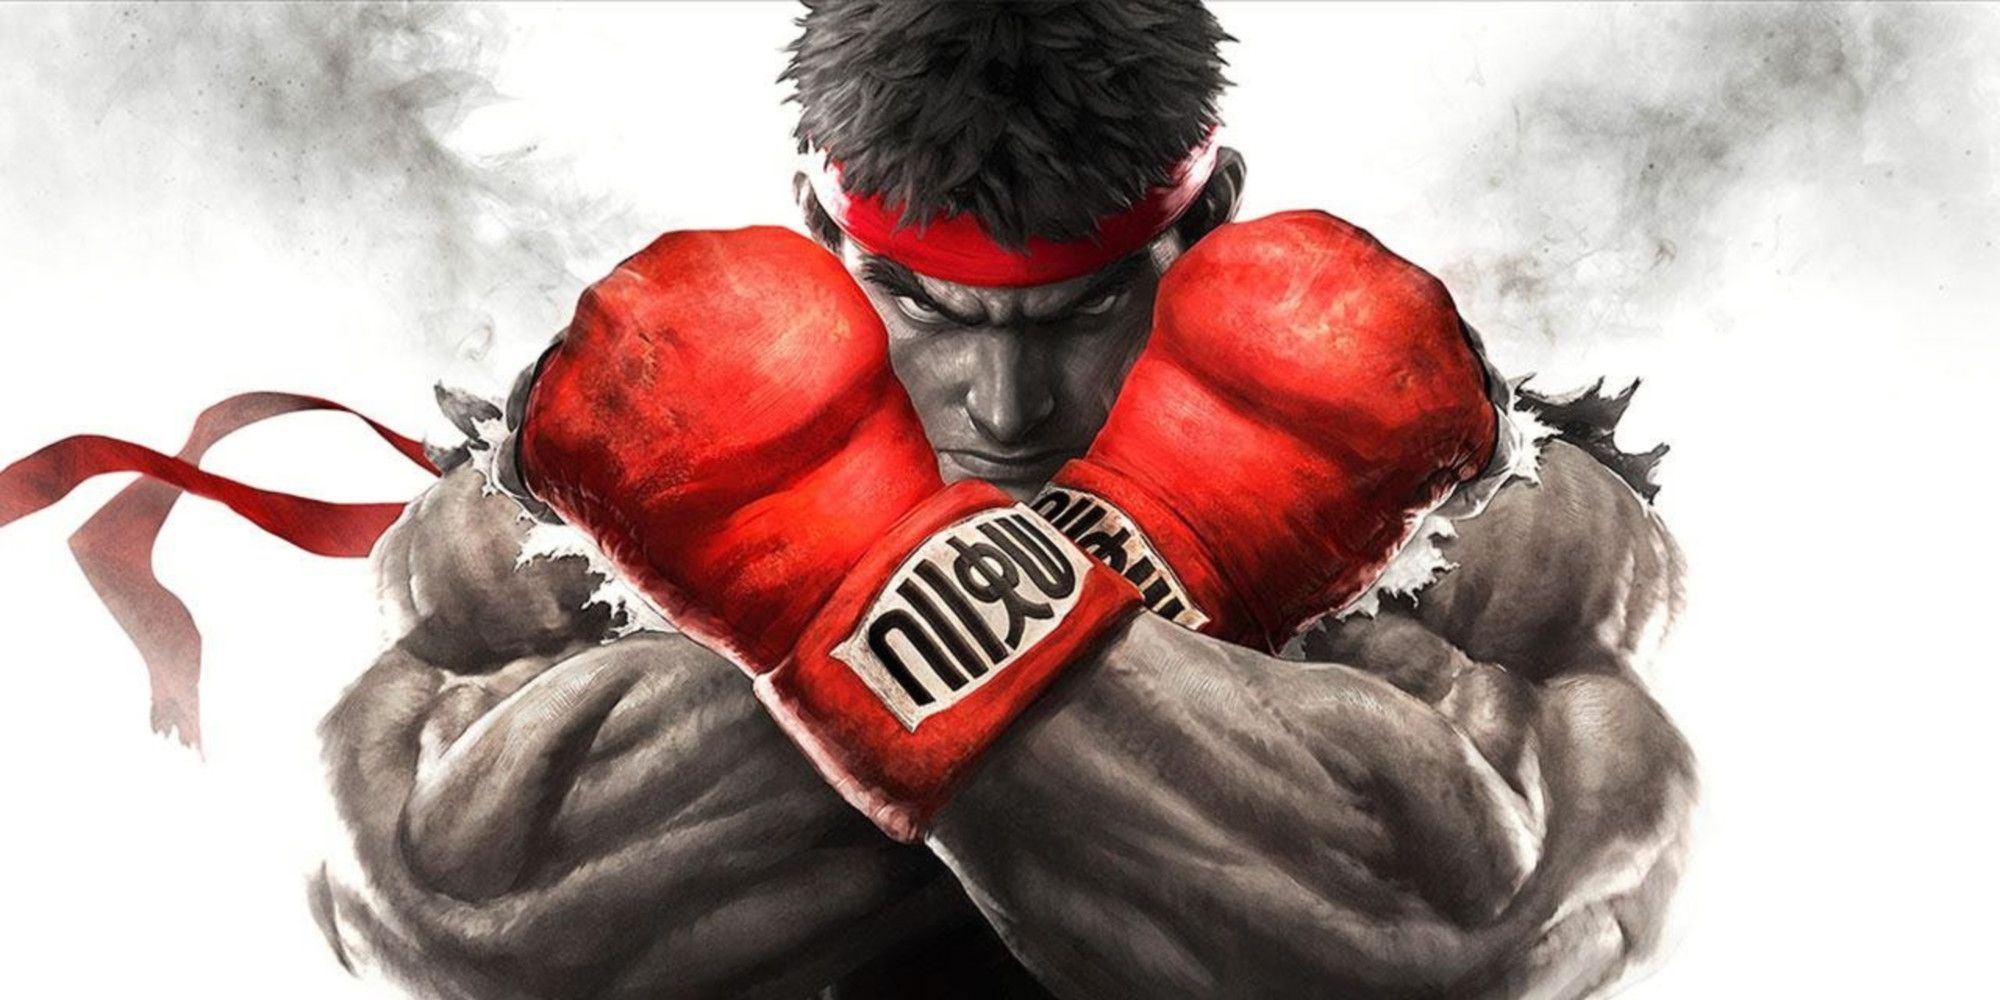 Insider Claims That Street Fighter 6 Will Be Announced Next Week